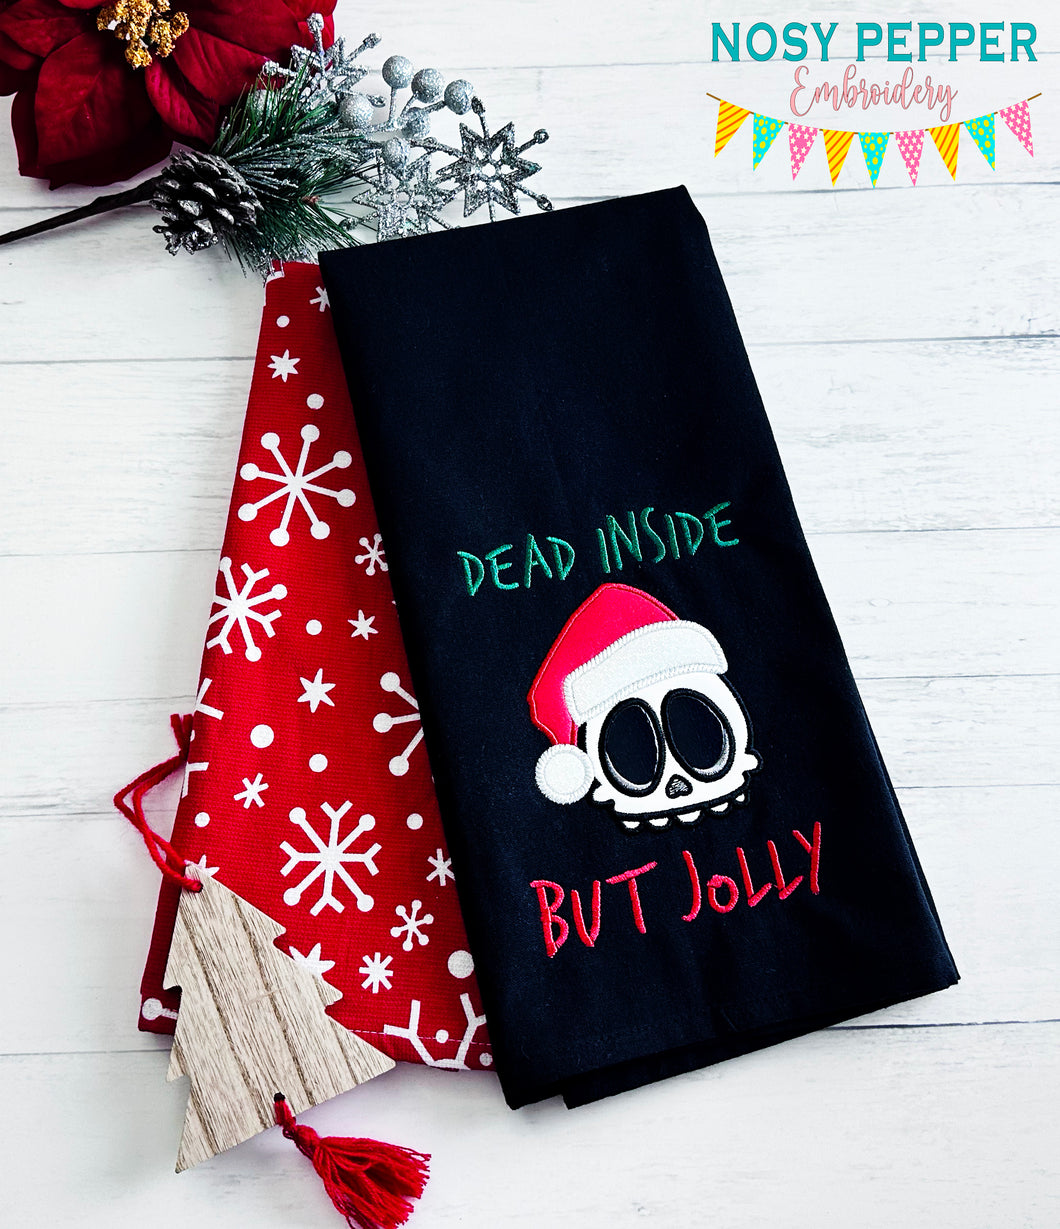 Dead Inside But Jolly applique machine embroidery design (4 sizes included) DIGITAL DOWNLOAD